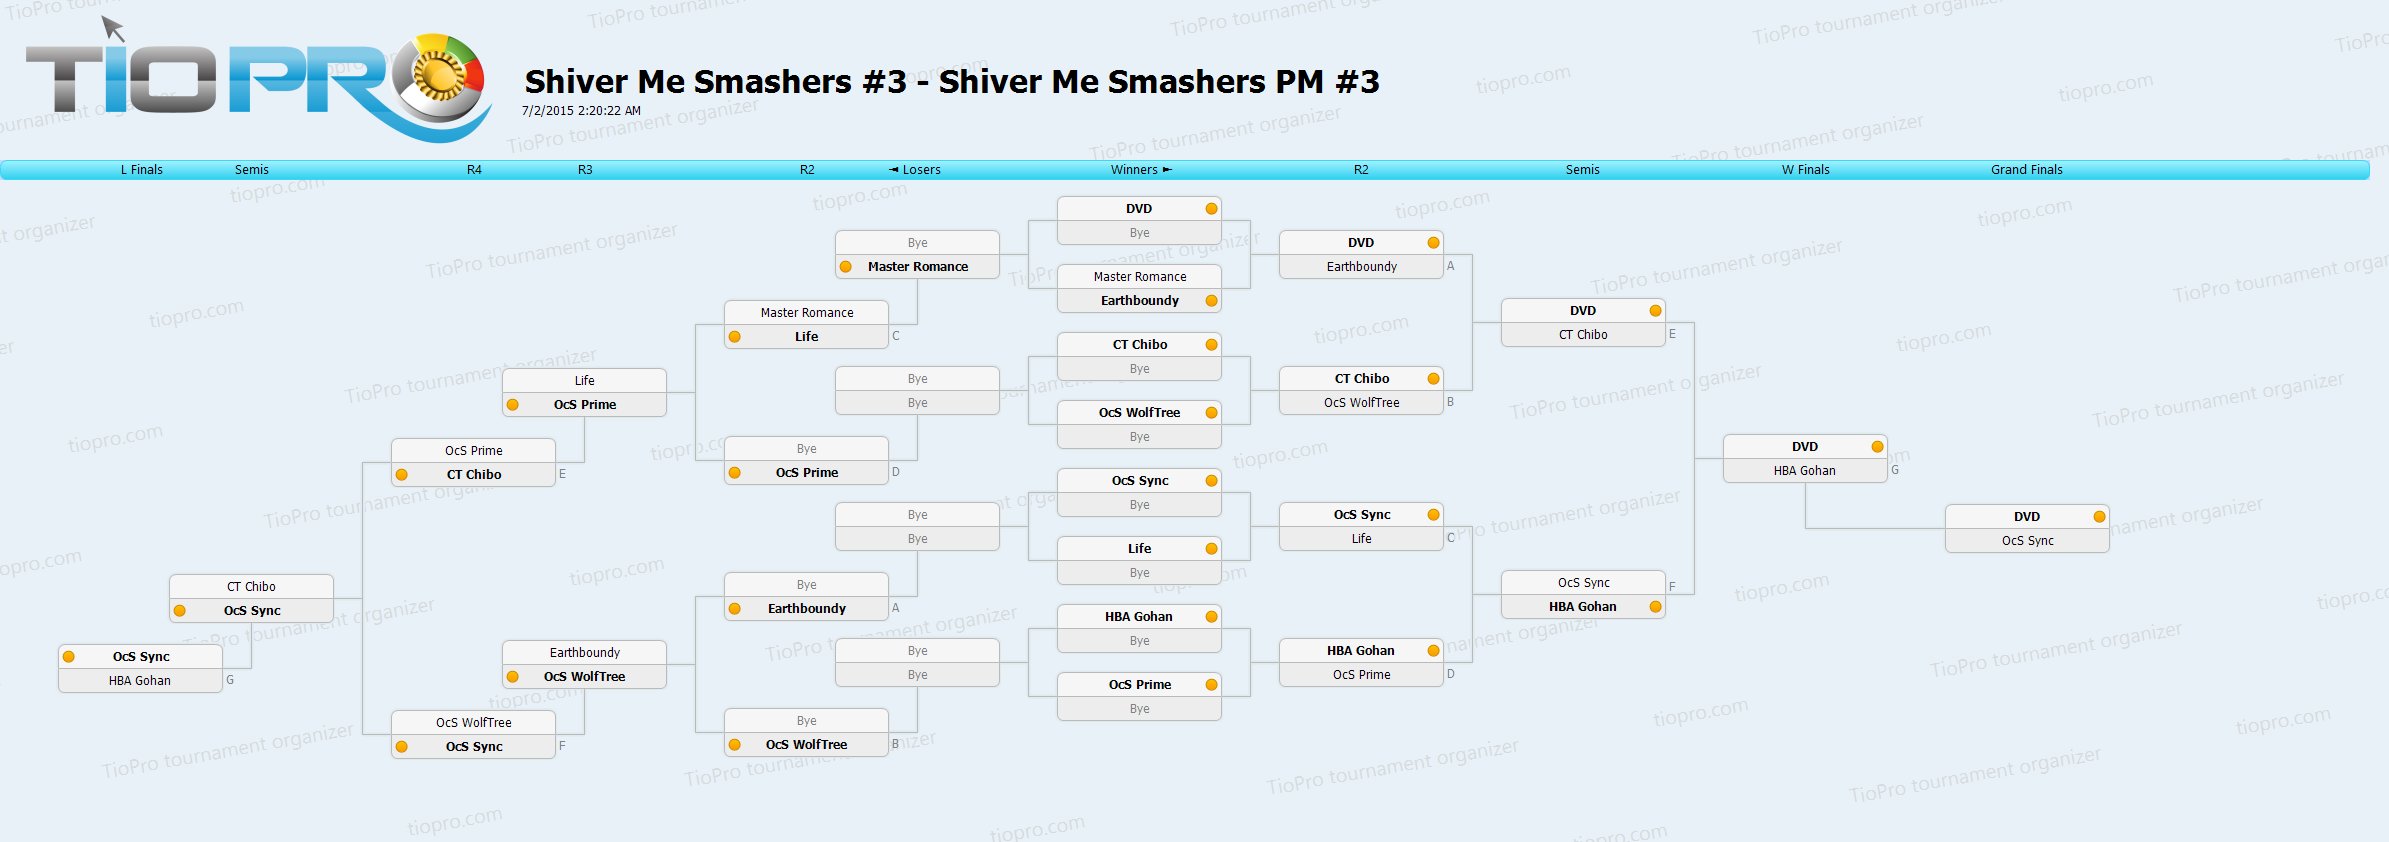 OcS Weekly - Shiver Me Smashers #3 PM